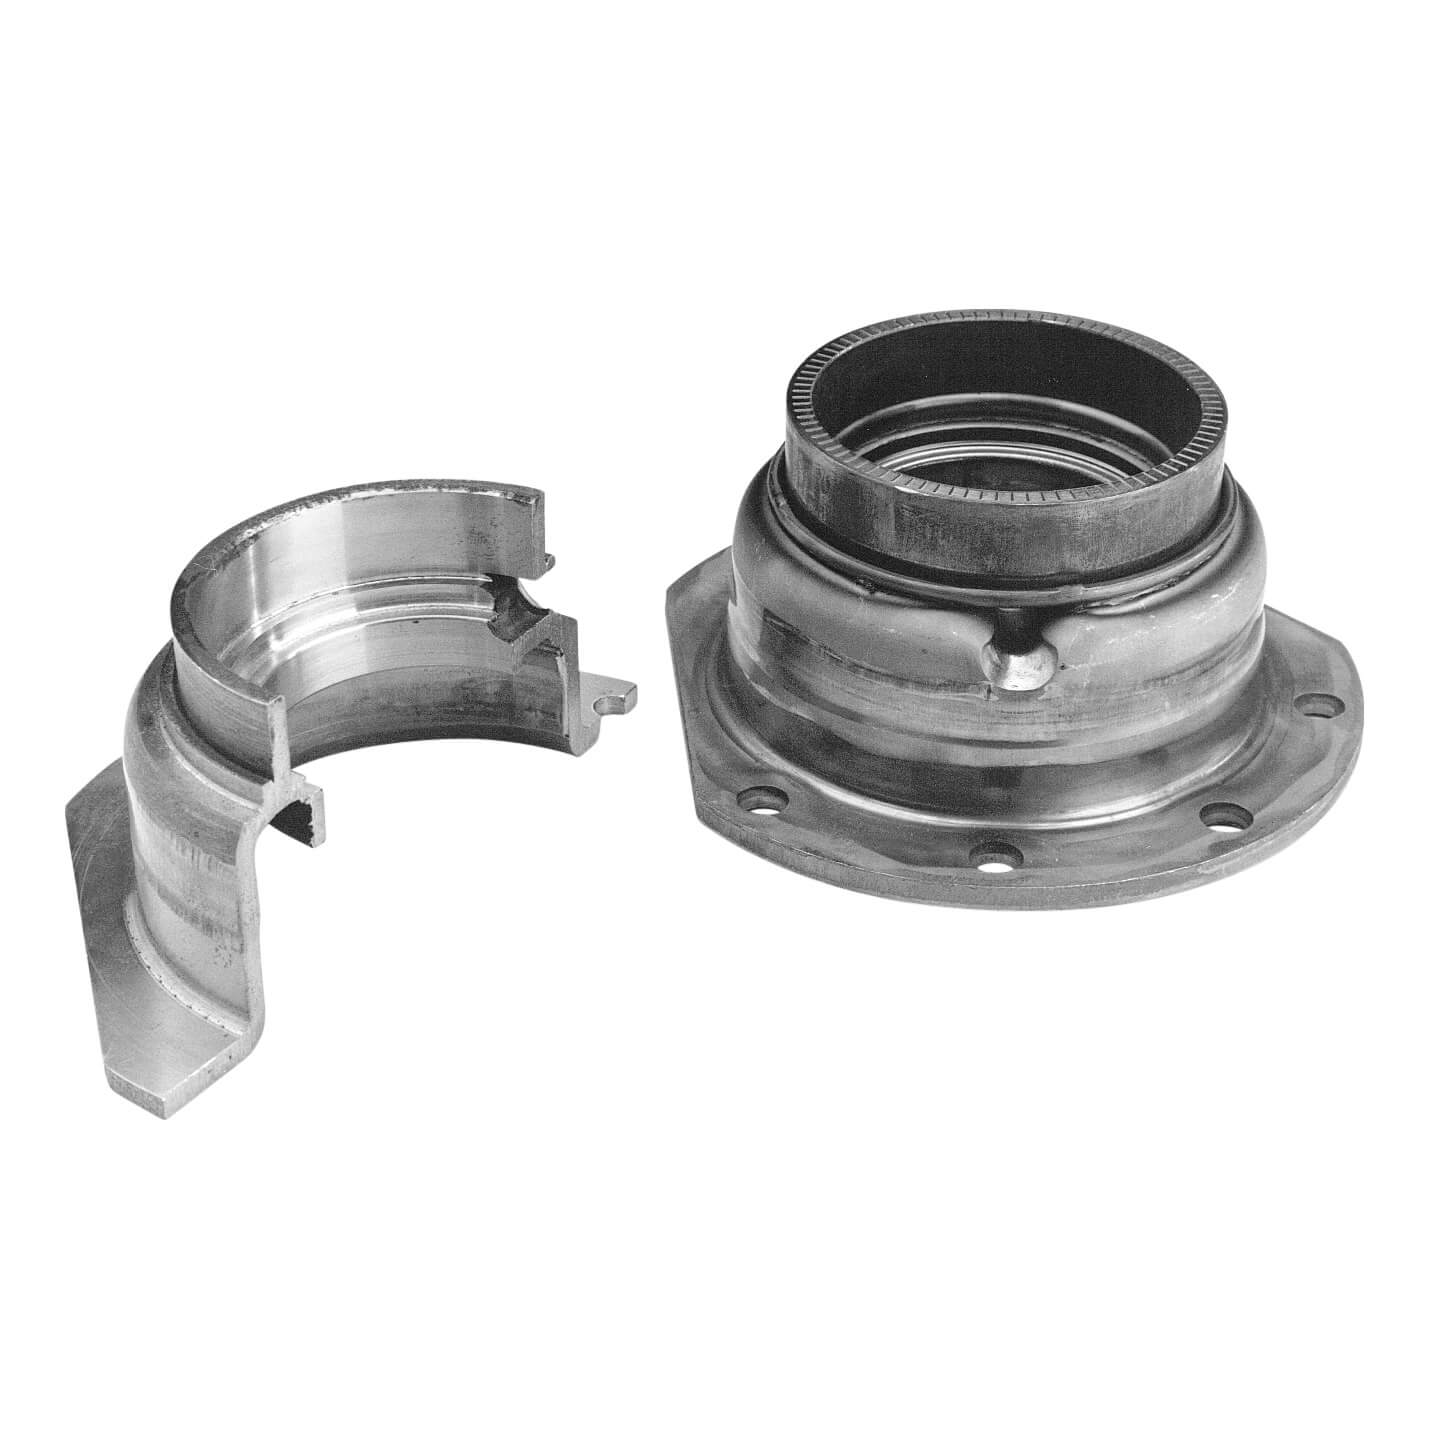 Retainer-differential bearing blank cross-section (left). Bearing housing retainer for transaxle (right).